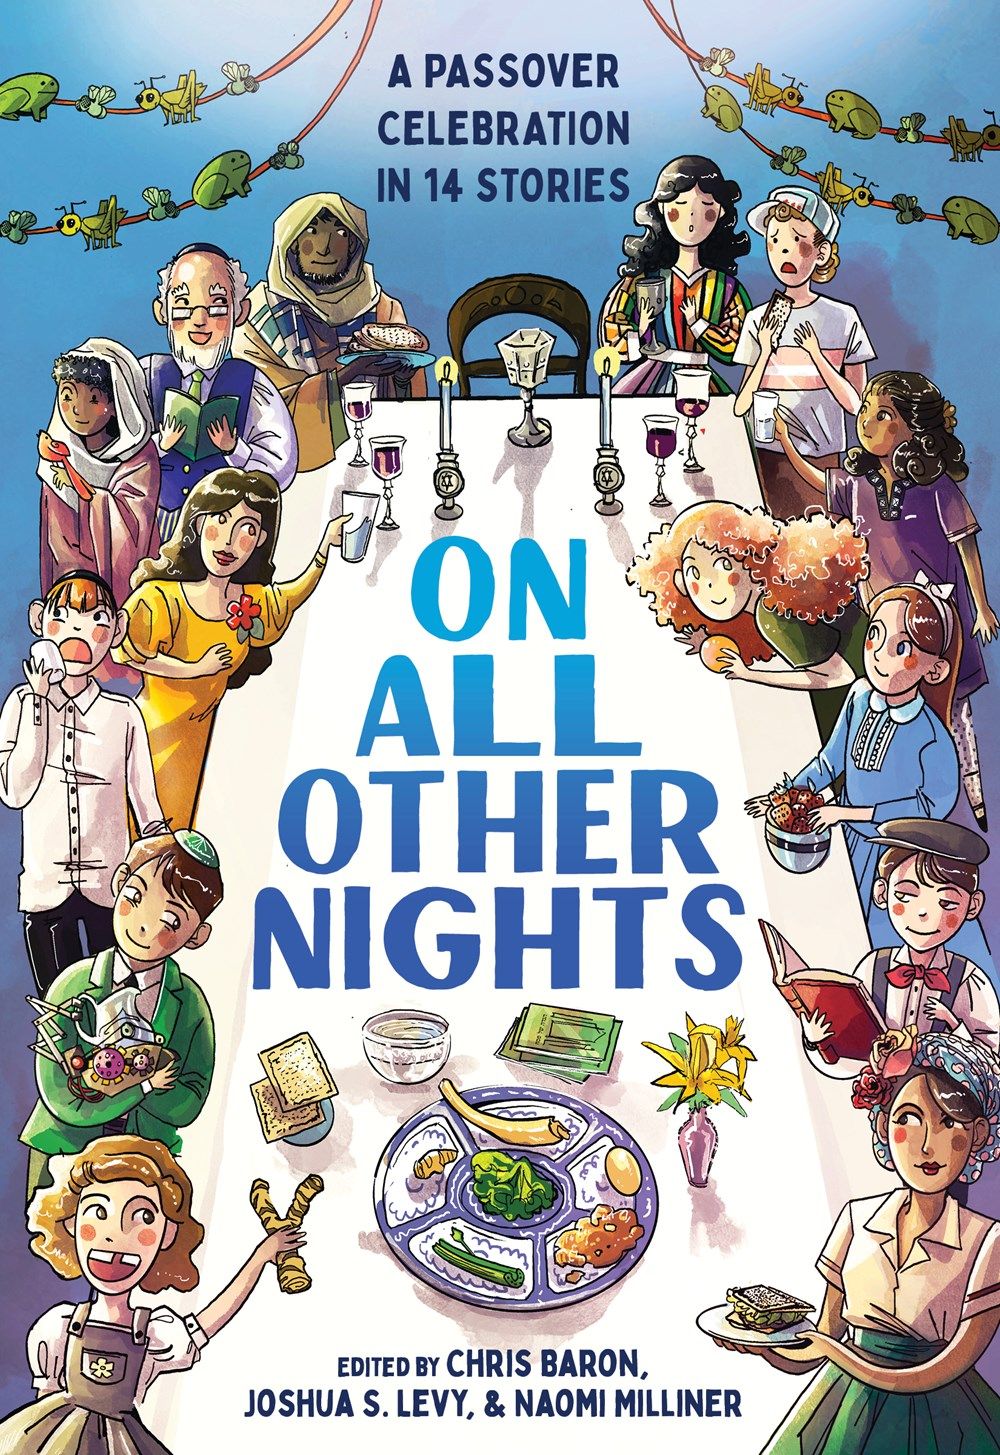 Cover of On All Other Nights: A Passover Celebration in 14 Stories edited by Chris Baron, Joshua S. Levy, & Naomi Milliner